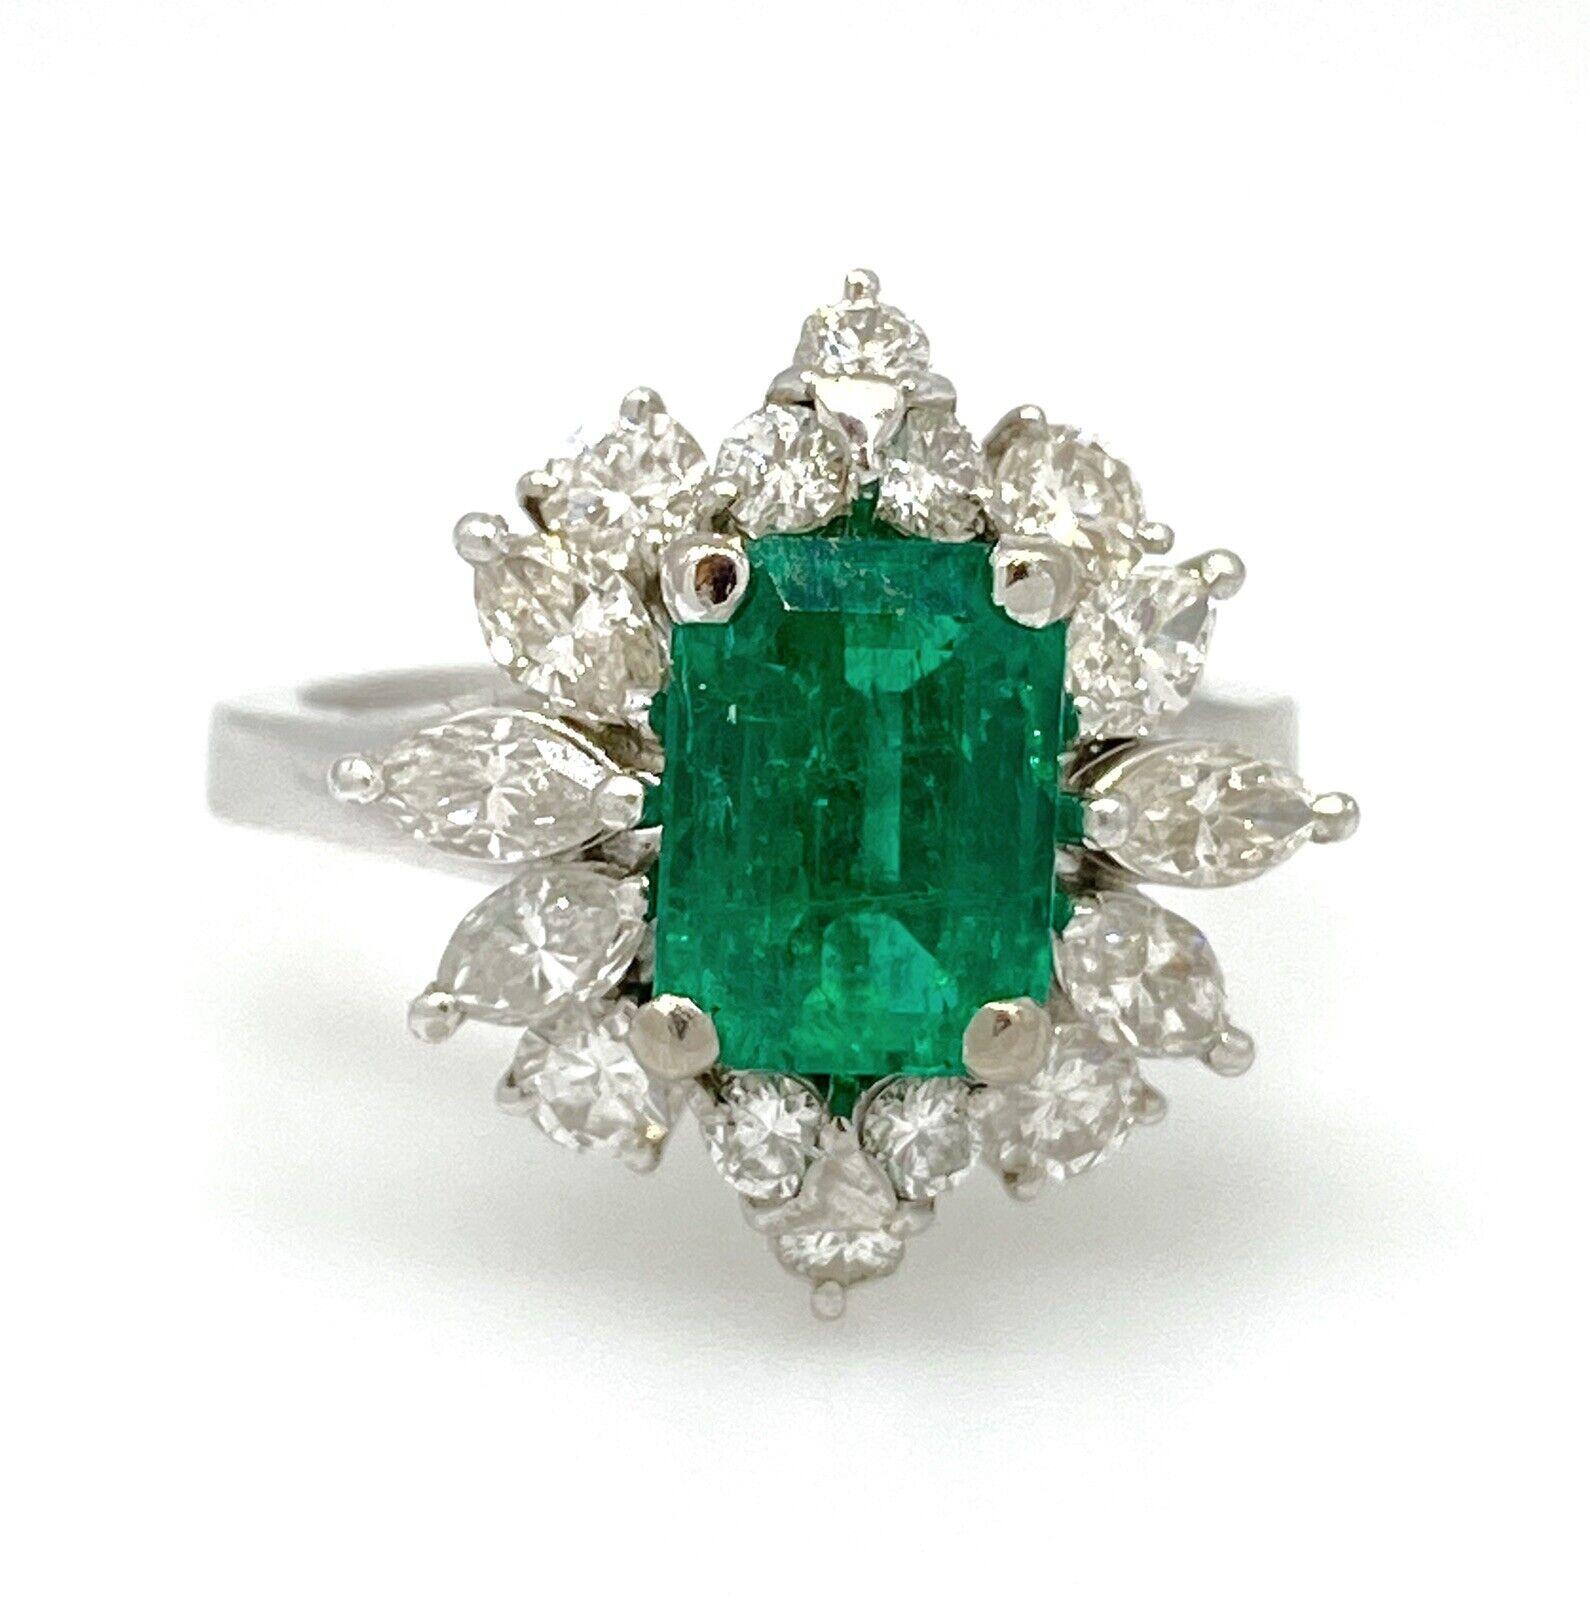 GIA Certified Emerald in a Vintage Diamond Setting 18k White Gold

Colombian Emerald & Diamond Ballerina Ring features a 1.62 carat Natural Emerald with beautiful vibrant green color accented by 6 Marquise and 10 Round Brilliant Diamond set in a 18k